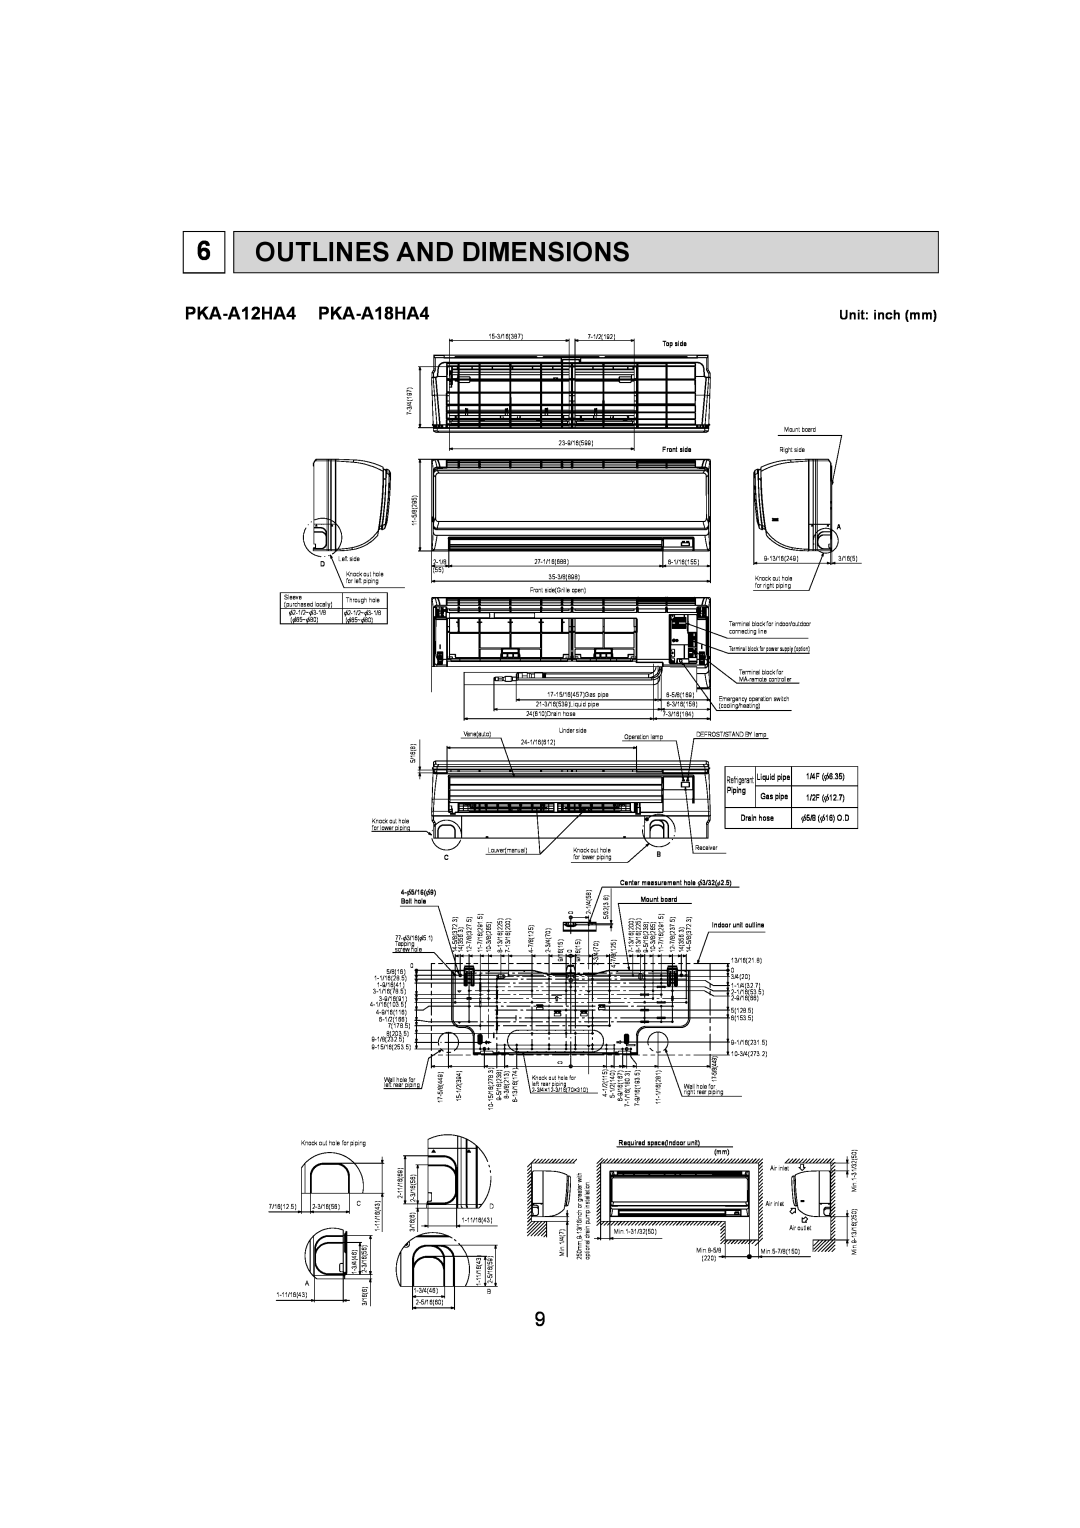 Mitsumi electronic service manual Outlines And Dimensions, PKA-A12HA4 PKA-A18HA4, Unit inch mm 